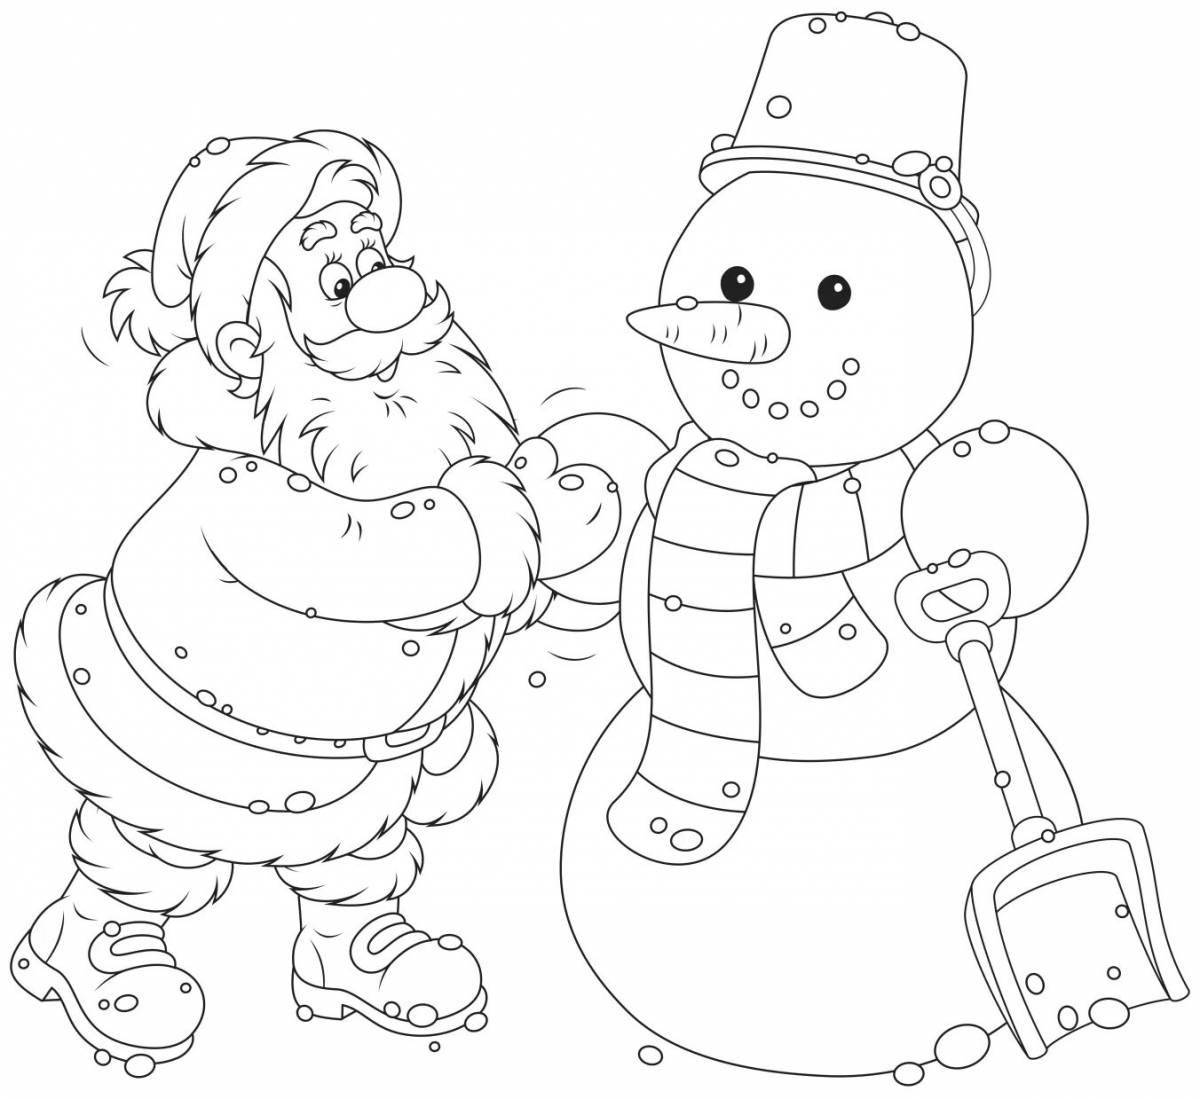 Radiant snowman coloring book